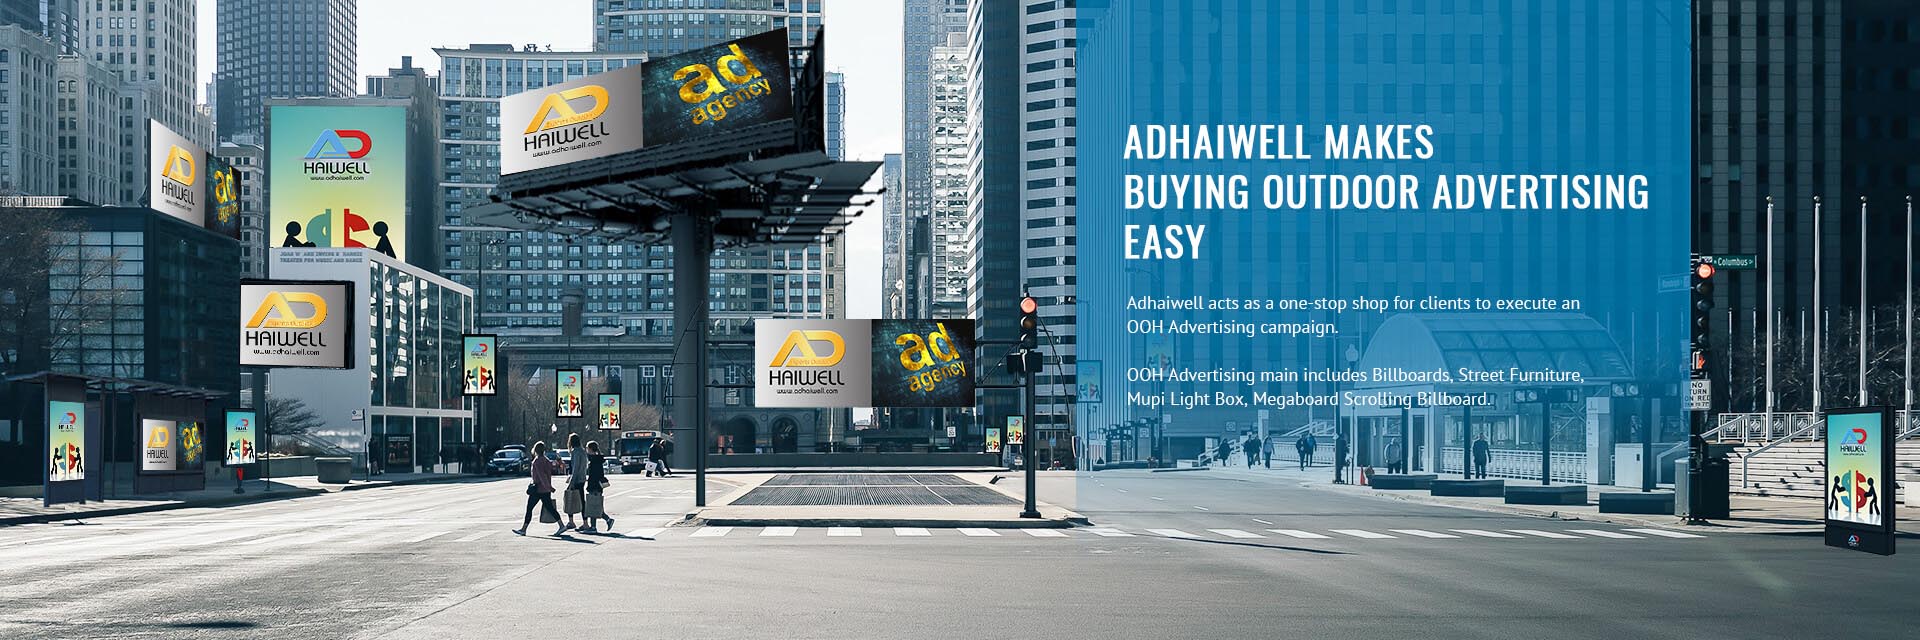 Adhaiwell Manufacturer of Outdoor Advertising Display